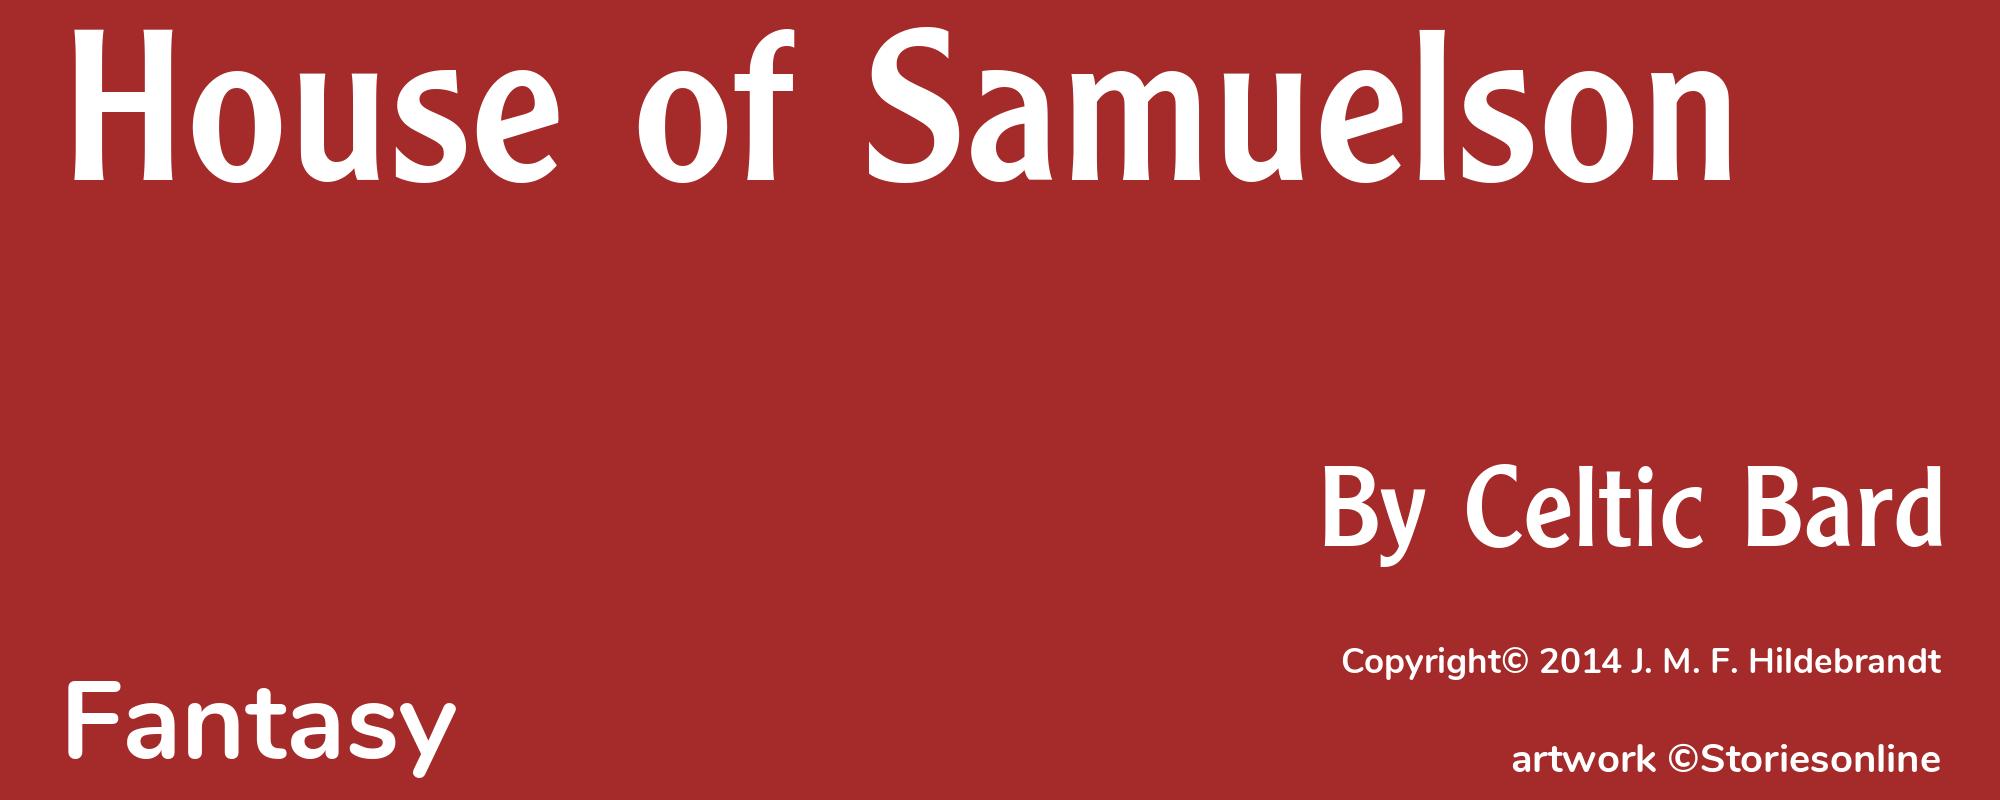 House of Samuelson - Cover